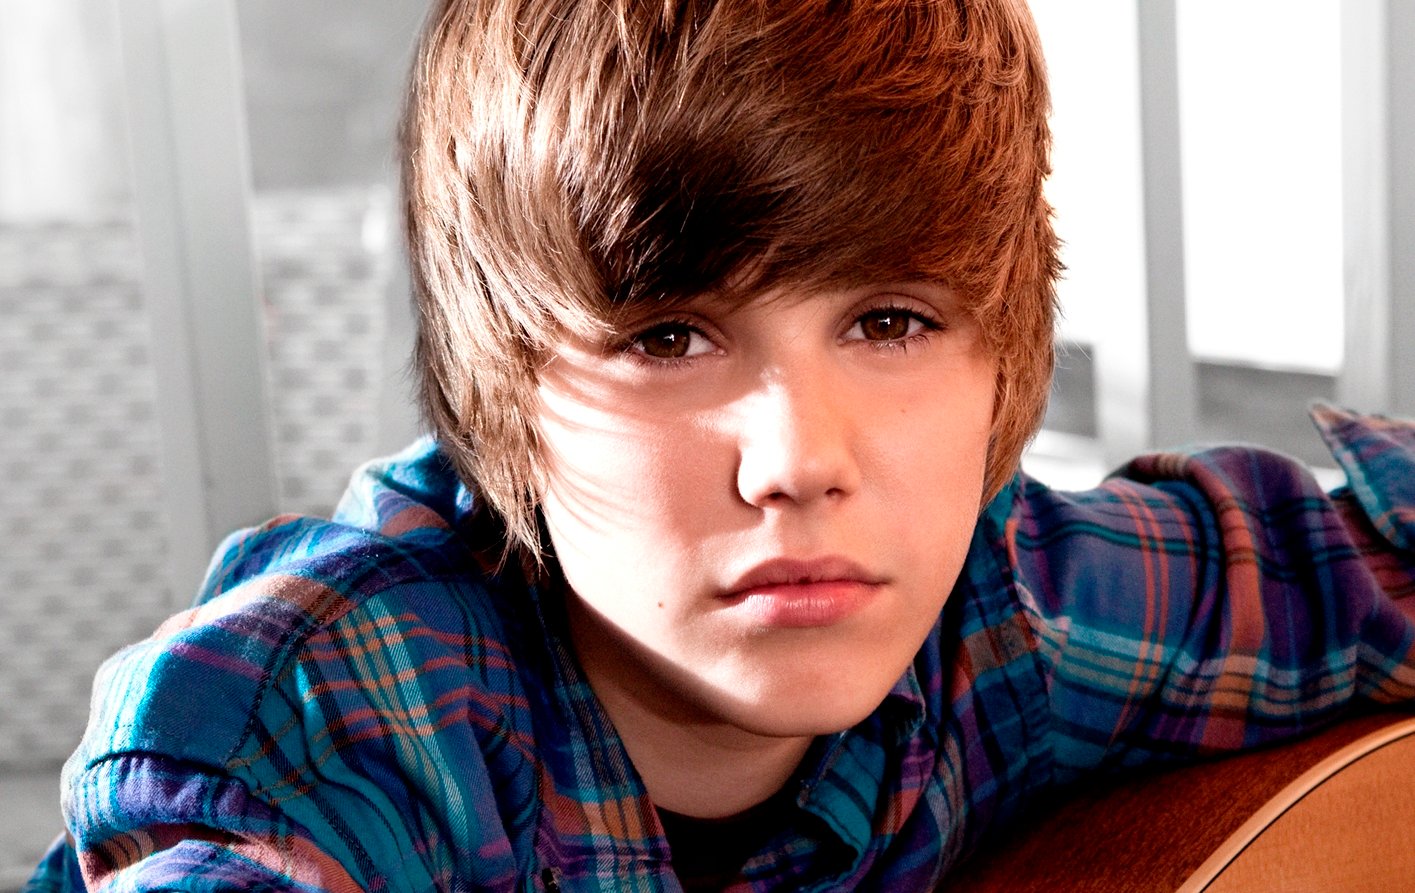 Justin Bieber Wallpapers HD 2013 HD Wallpapers Backgrounds Photos